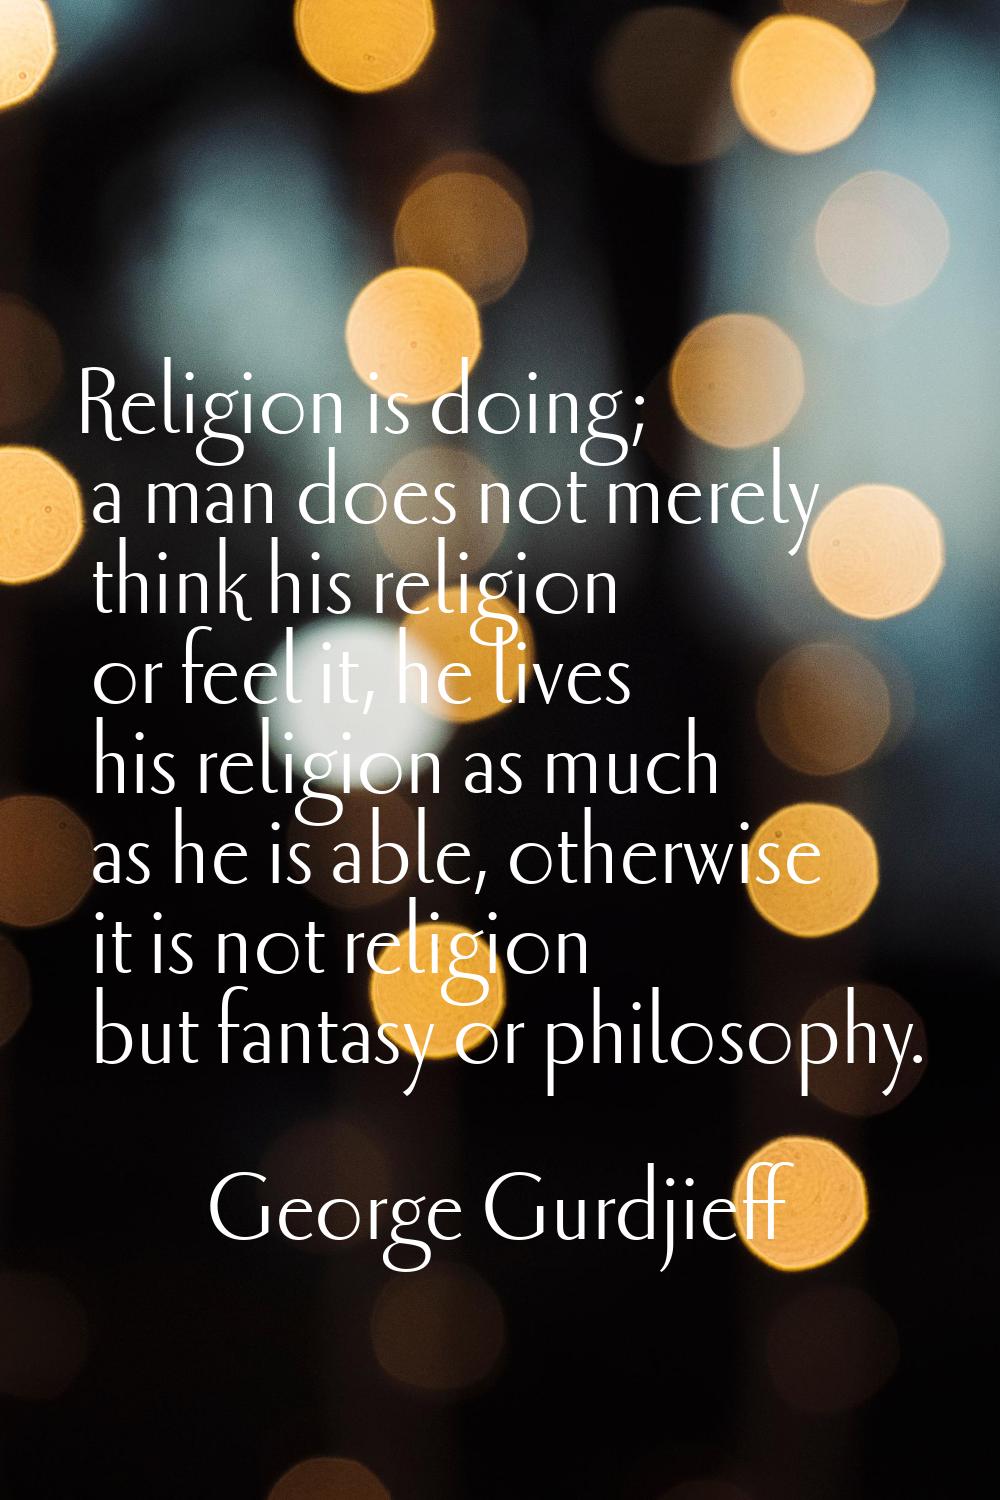 Religion is doing; a man does not merely think his religion or feel it, he lives his religion as mu